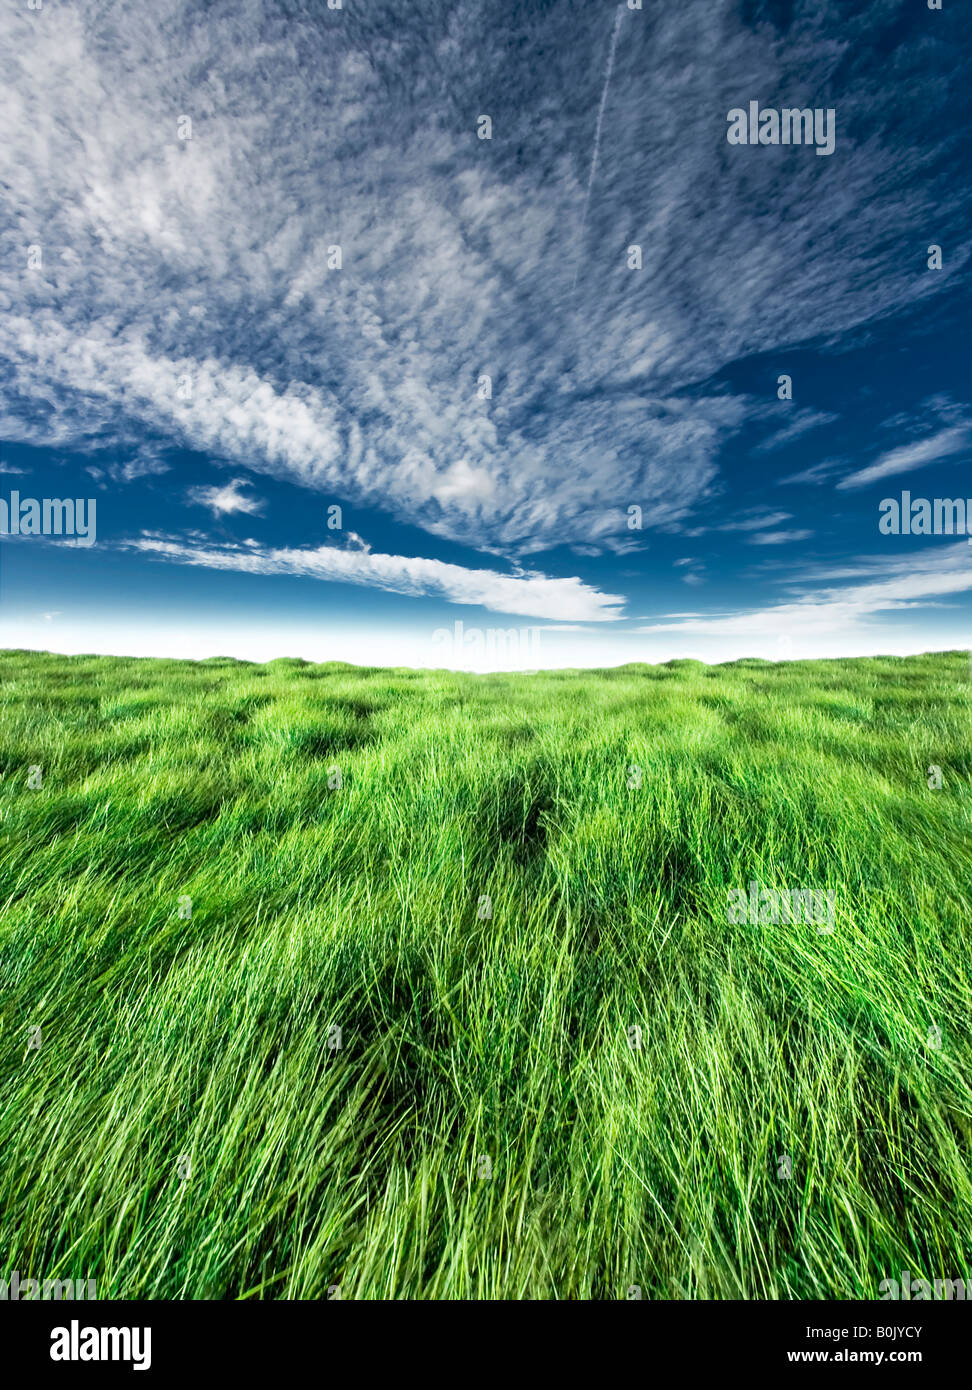 Blue Sky With High Green Grass Horizon Shot Suitable For Design